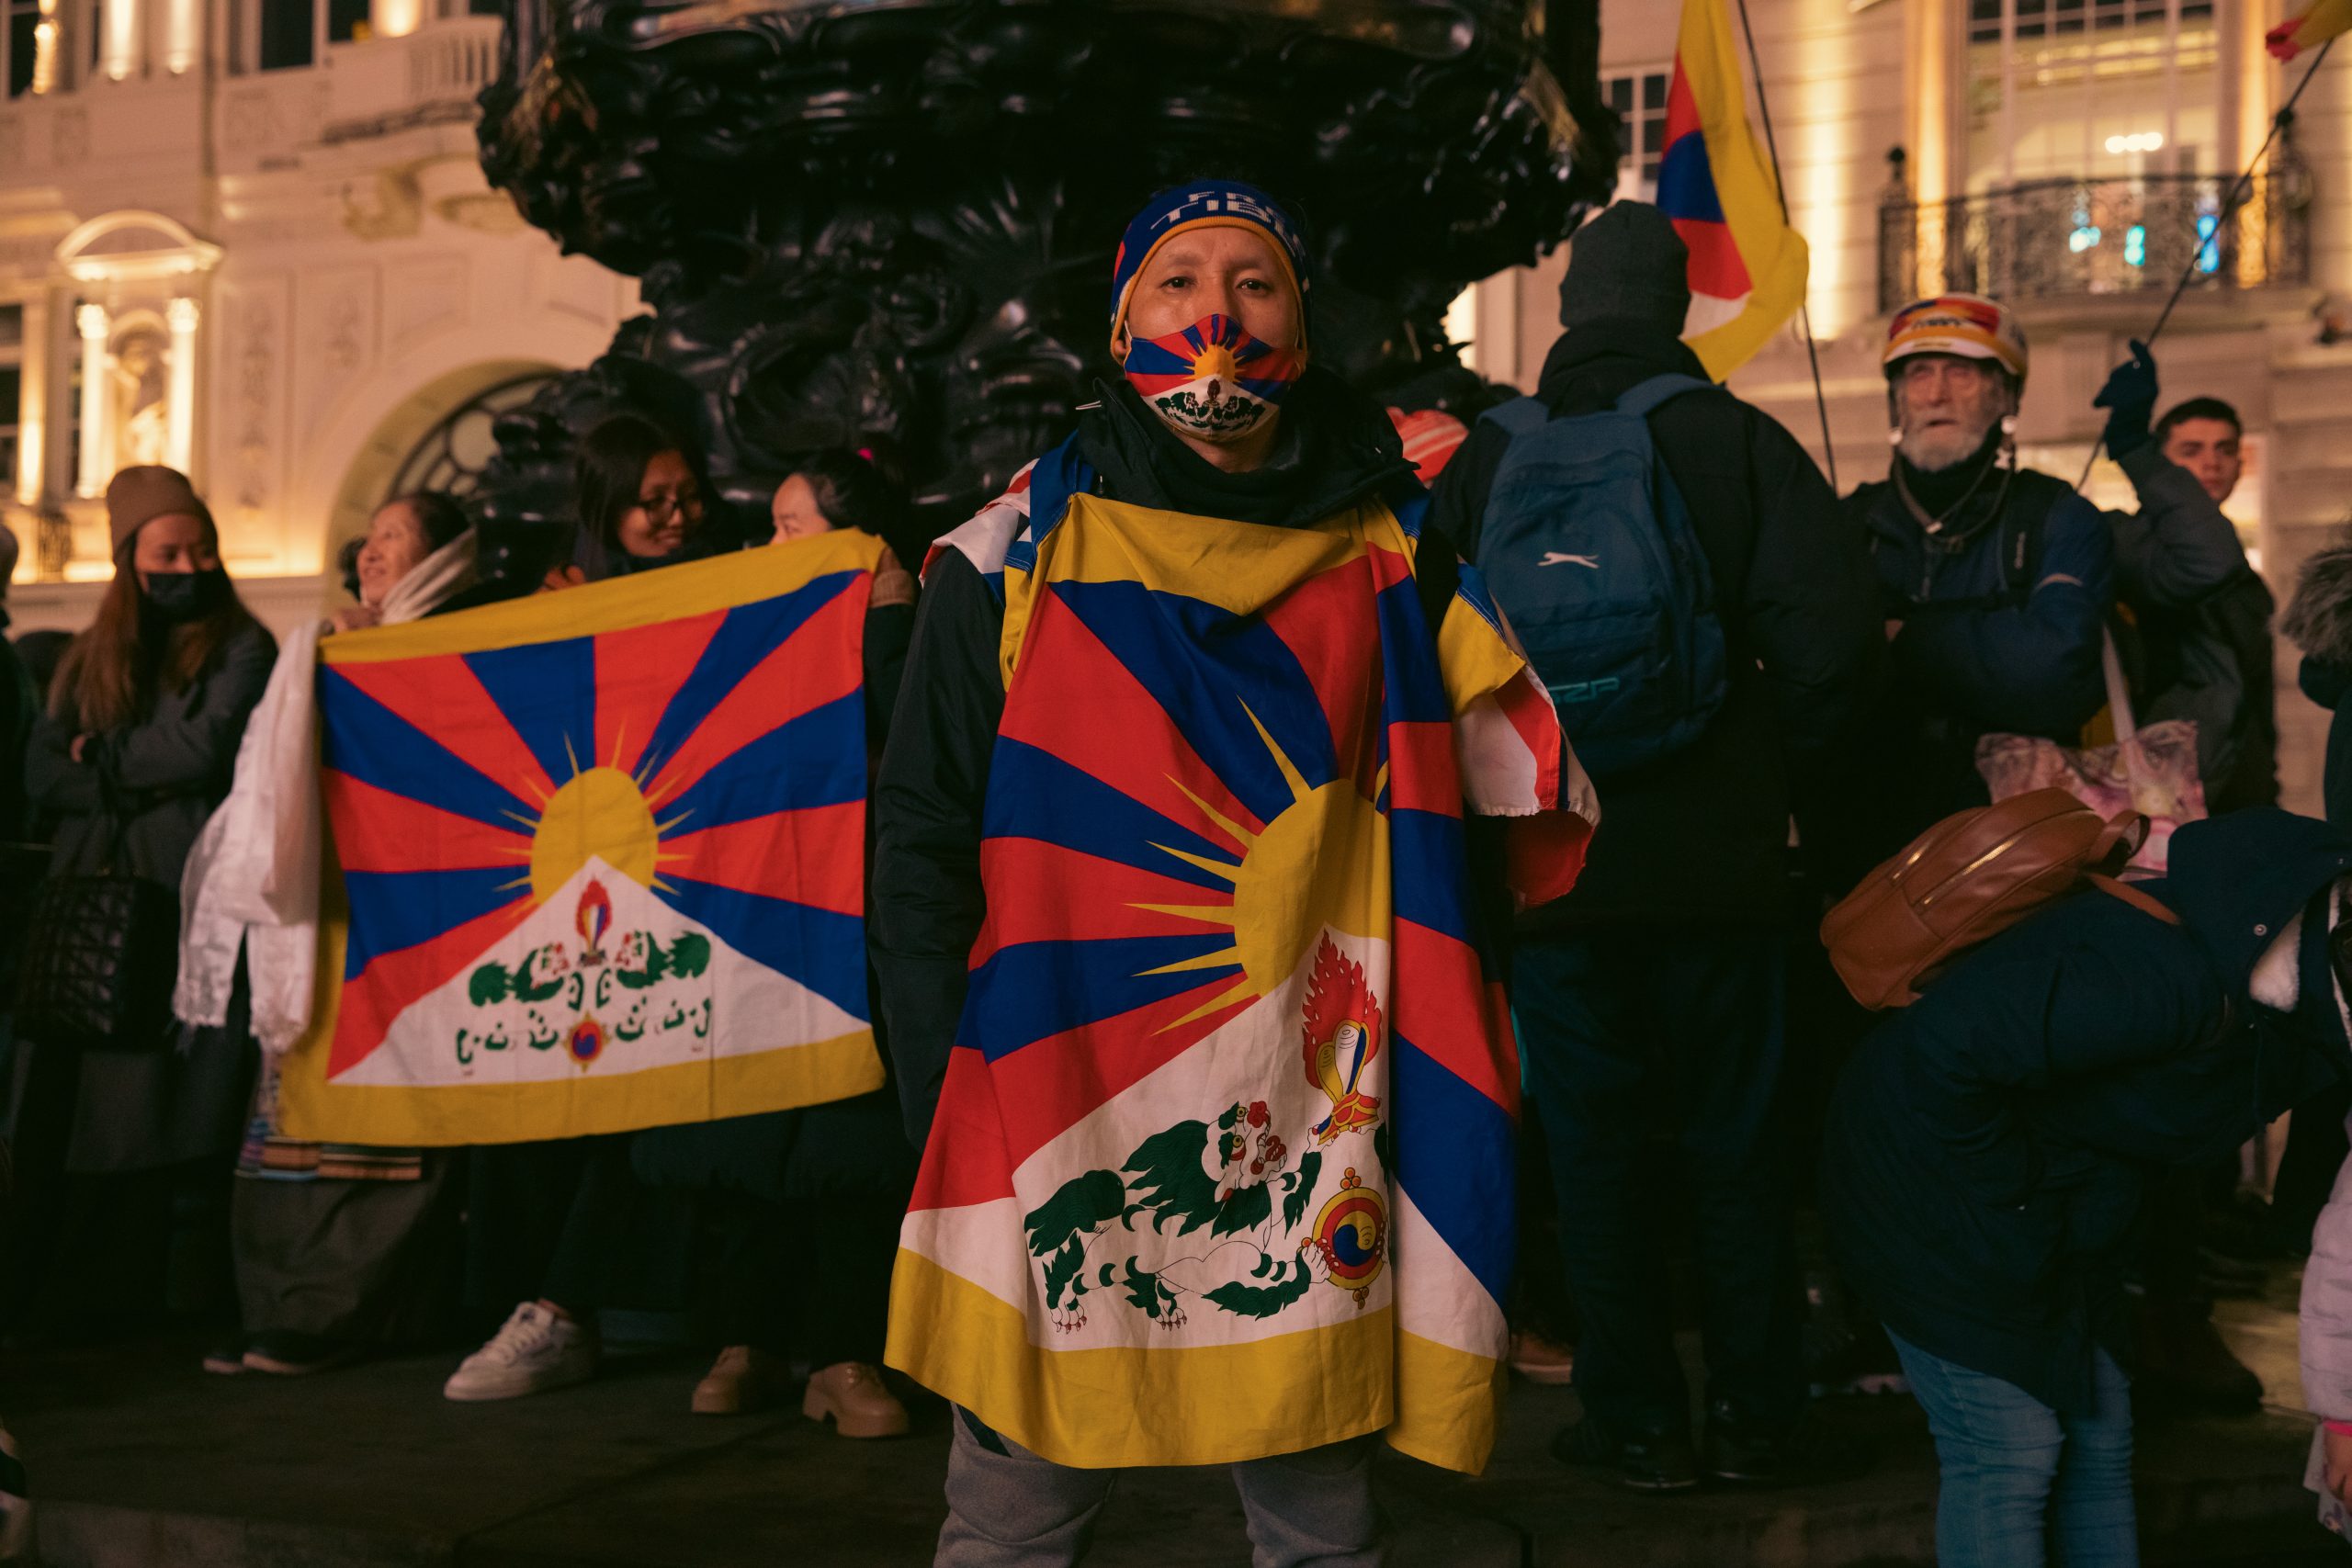 A member of the Tibetan community attending the Dalai Lama launch in London's Piccadilly Circus. January, CIRCA 20:23